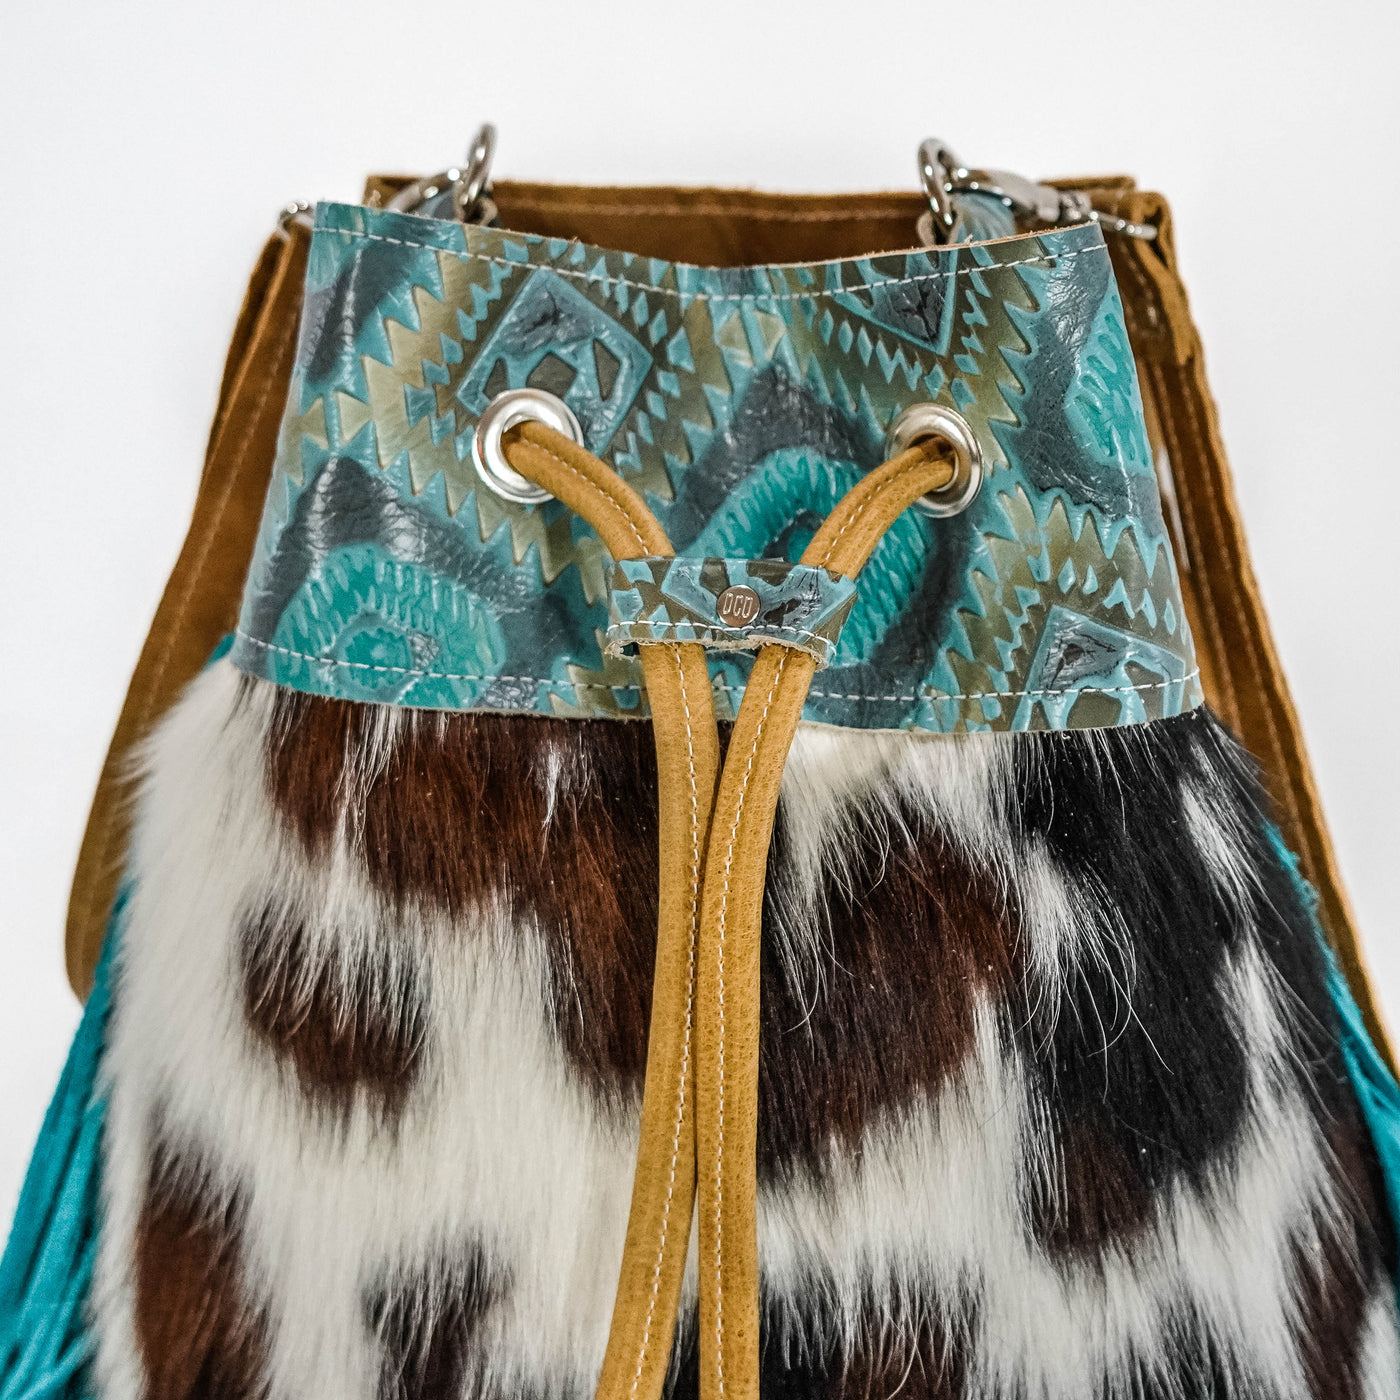 Gabby - Tricolor w/ Canyon Aztec-Gabby-Western-Cowhide-Bags-Handmade-Products-Gifts-Dancing Cactus Designs